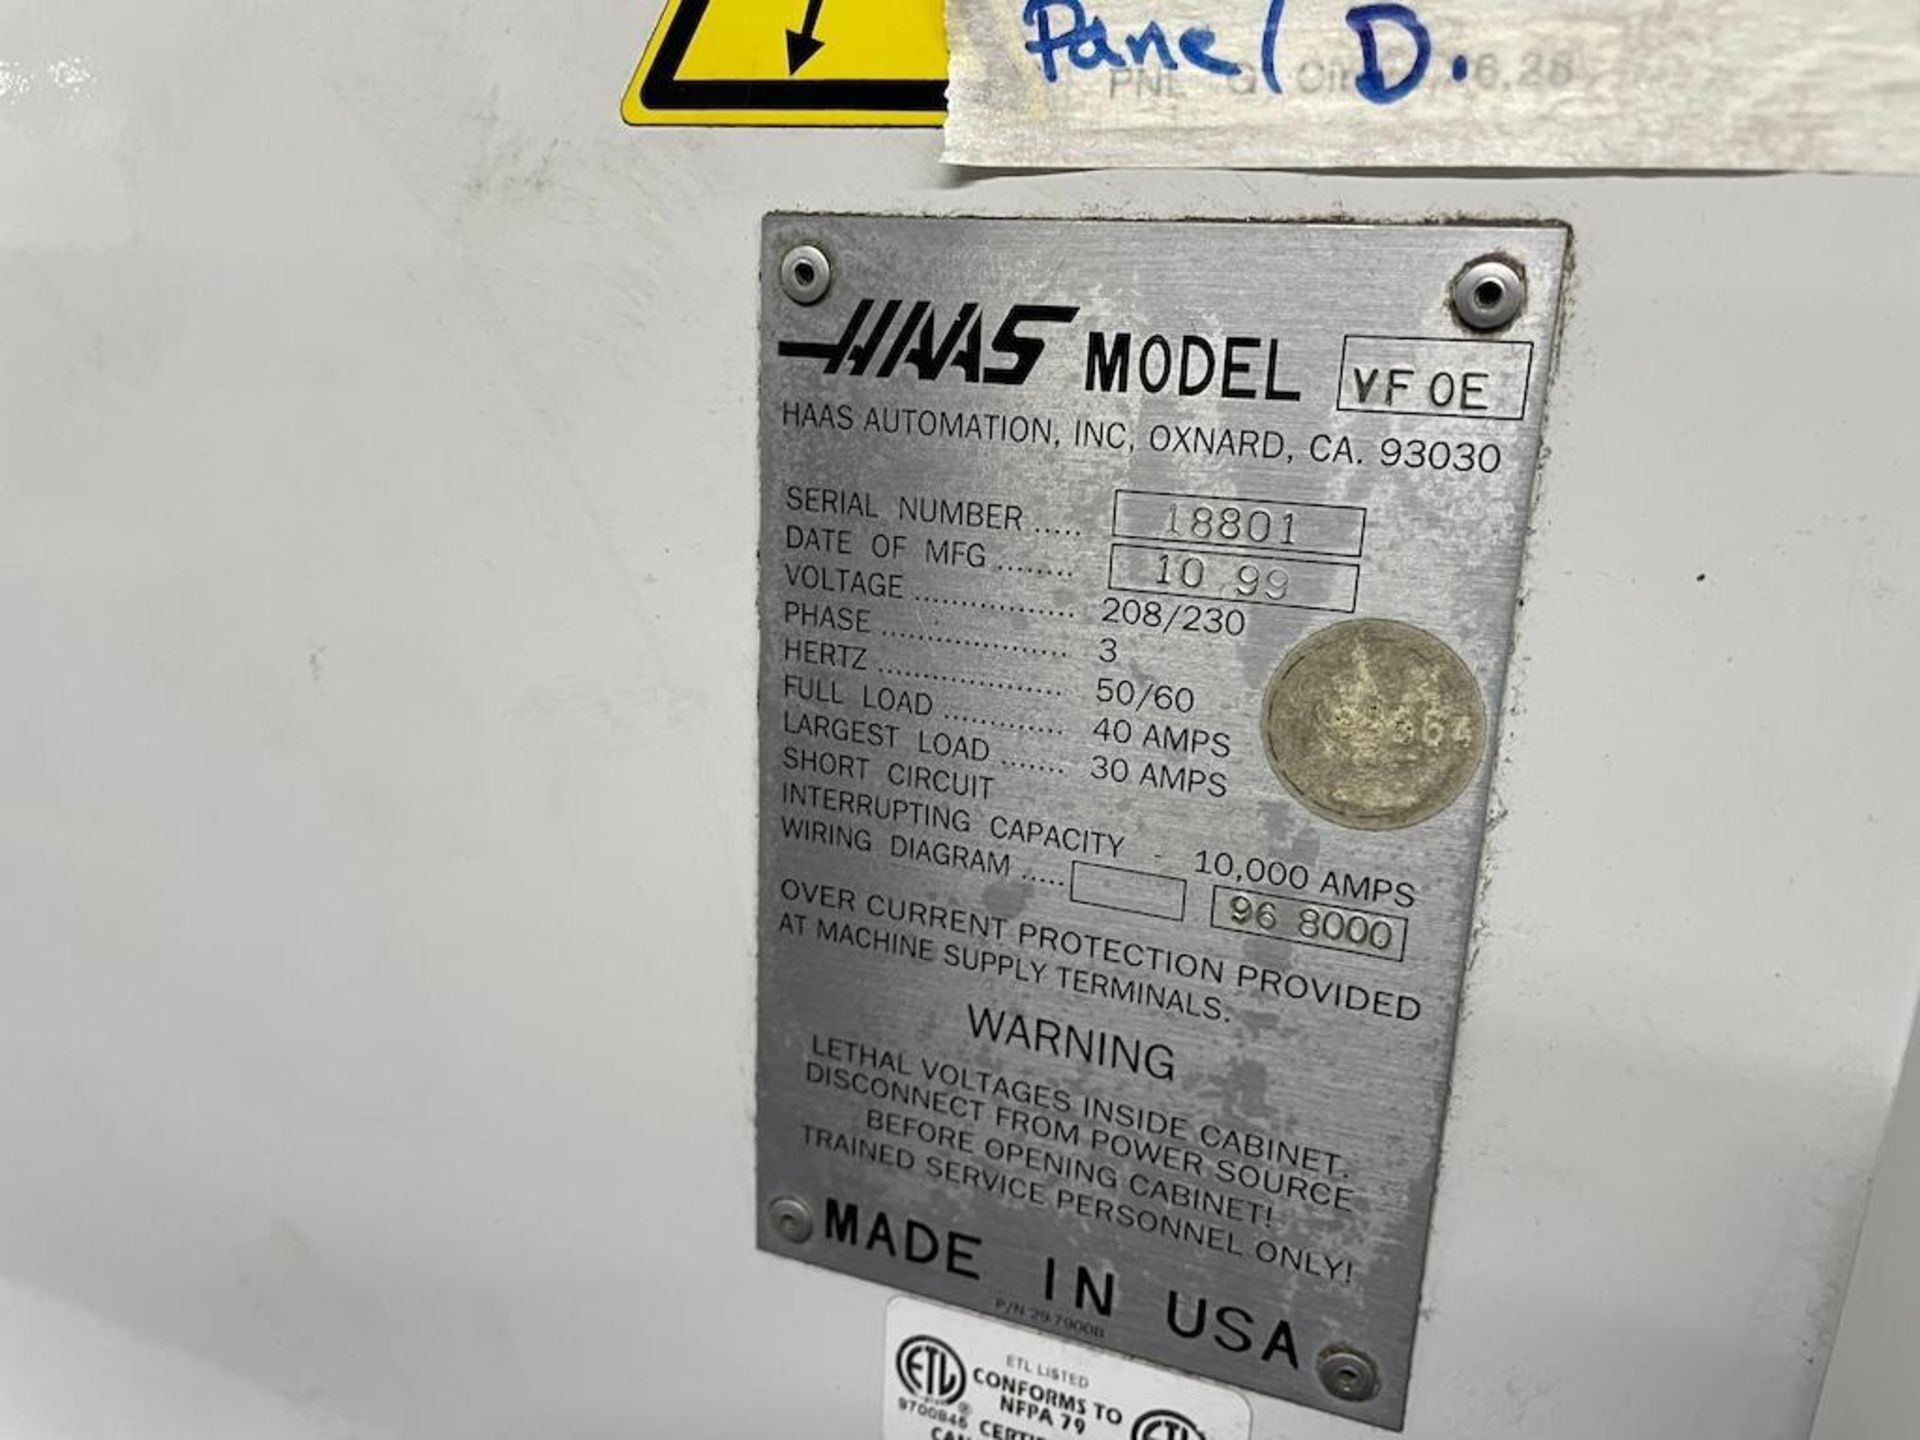 HAAS CNC VMC MODEL VFOE, 20 ATC, CAT 40, 36 IN X 14 IN TABLE, 7,000 RPM, PROGRAMMABLE COOLANT - Image 6 of 7